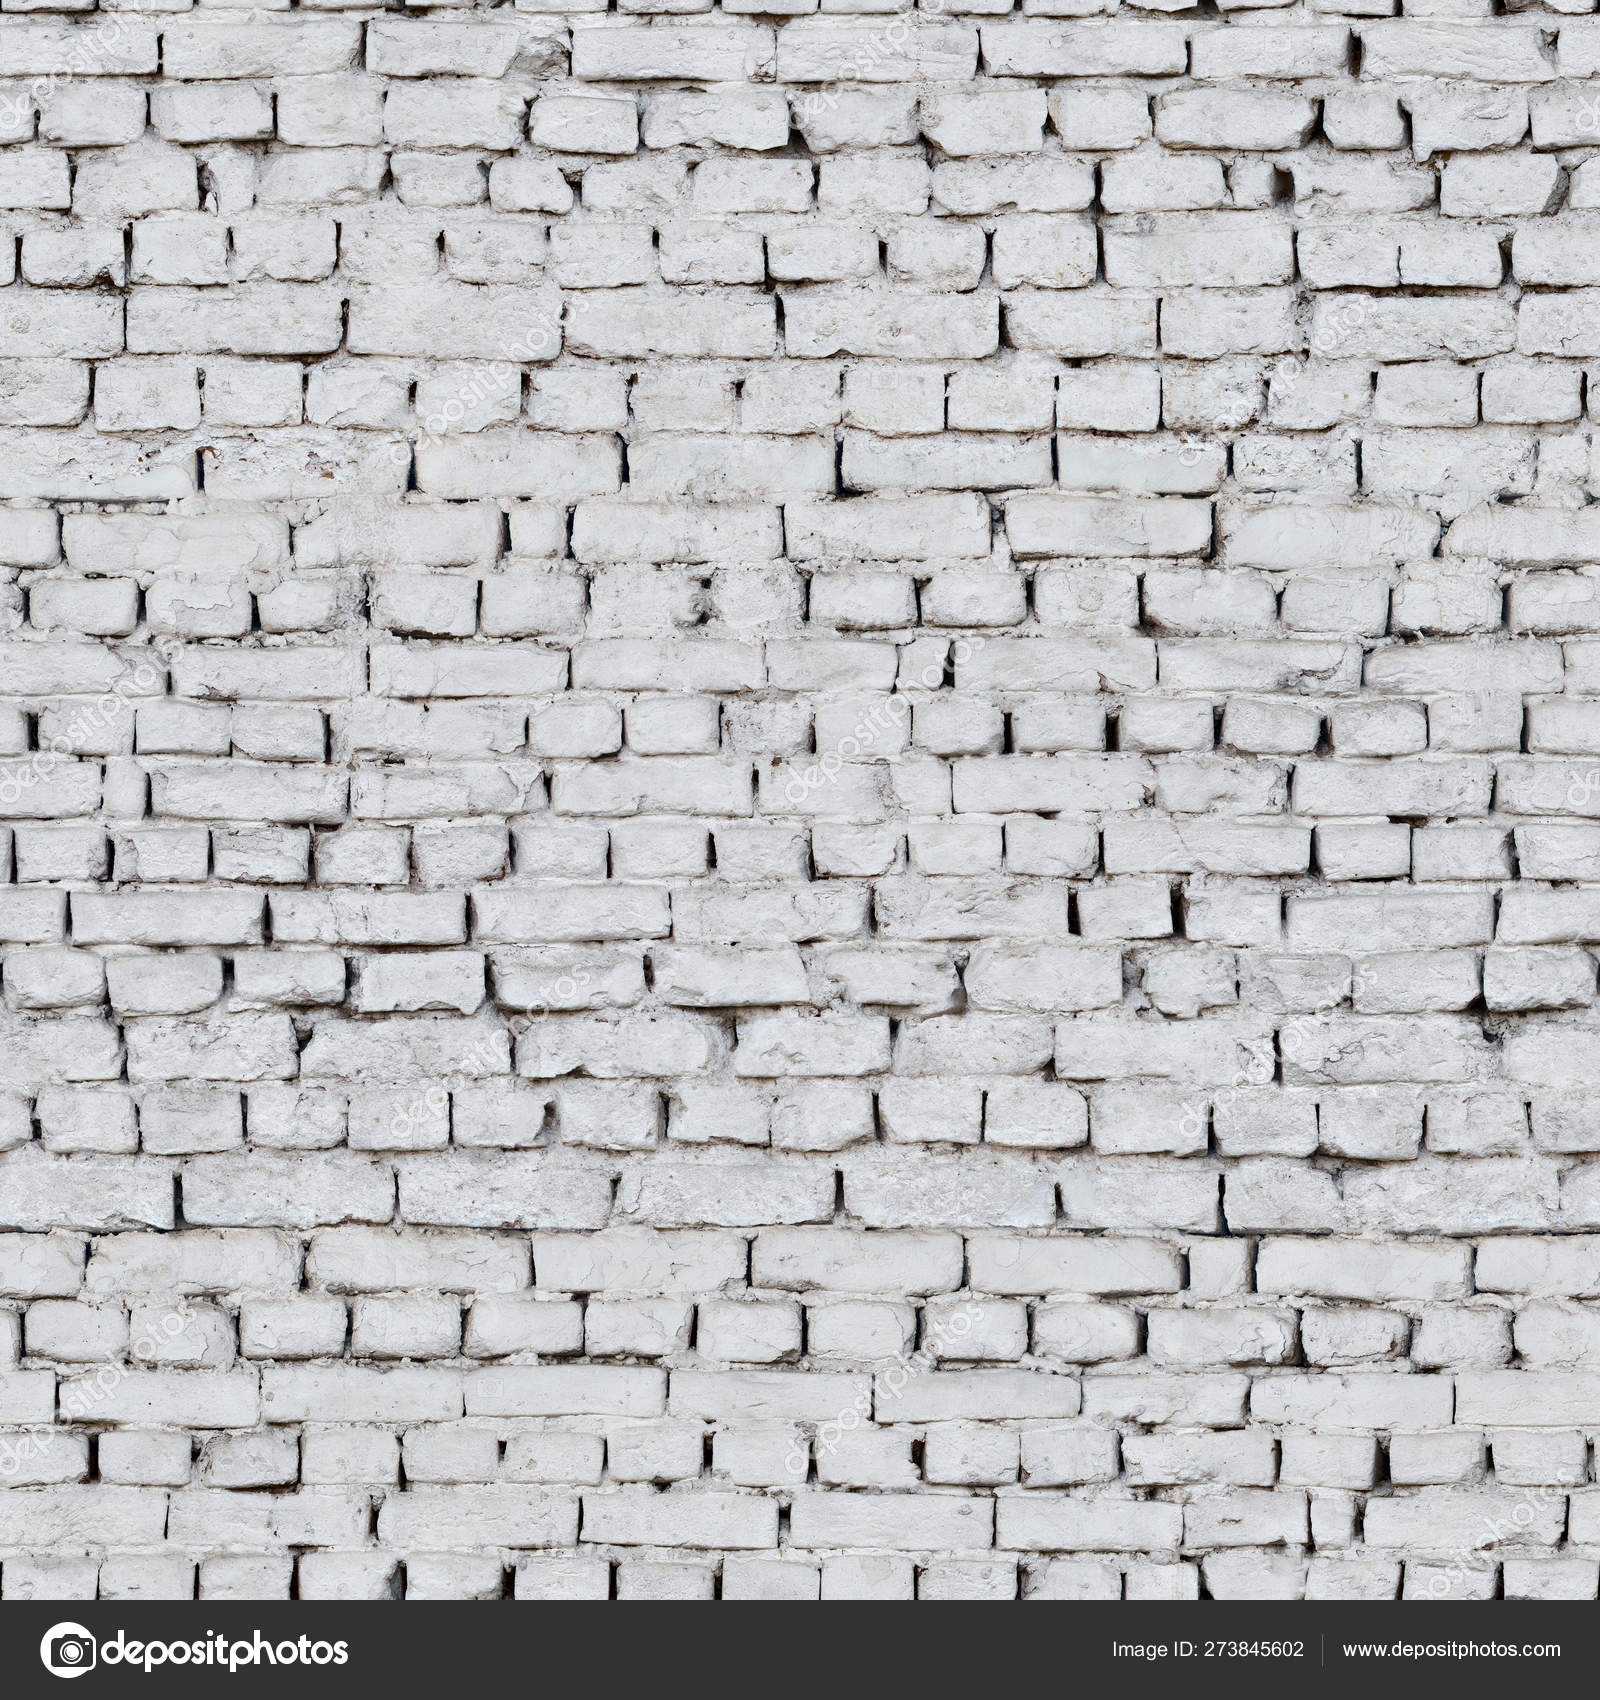 The Old Brick Walls Of White Brick Texture Or Background Stock Photo Image By C Mastak80